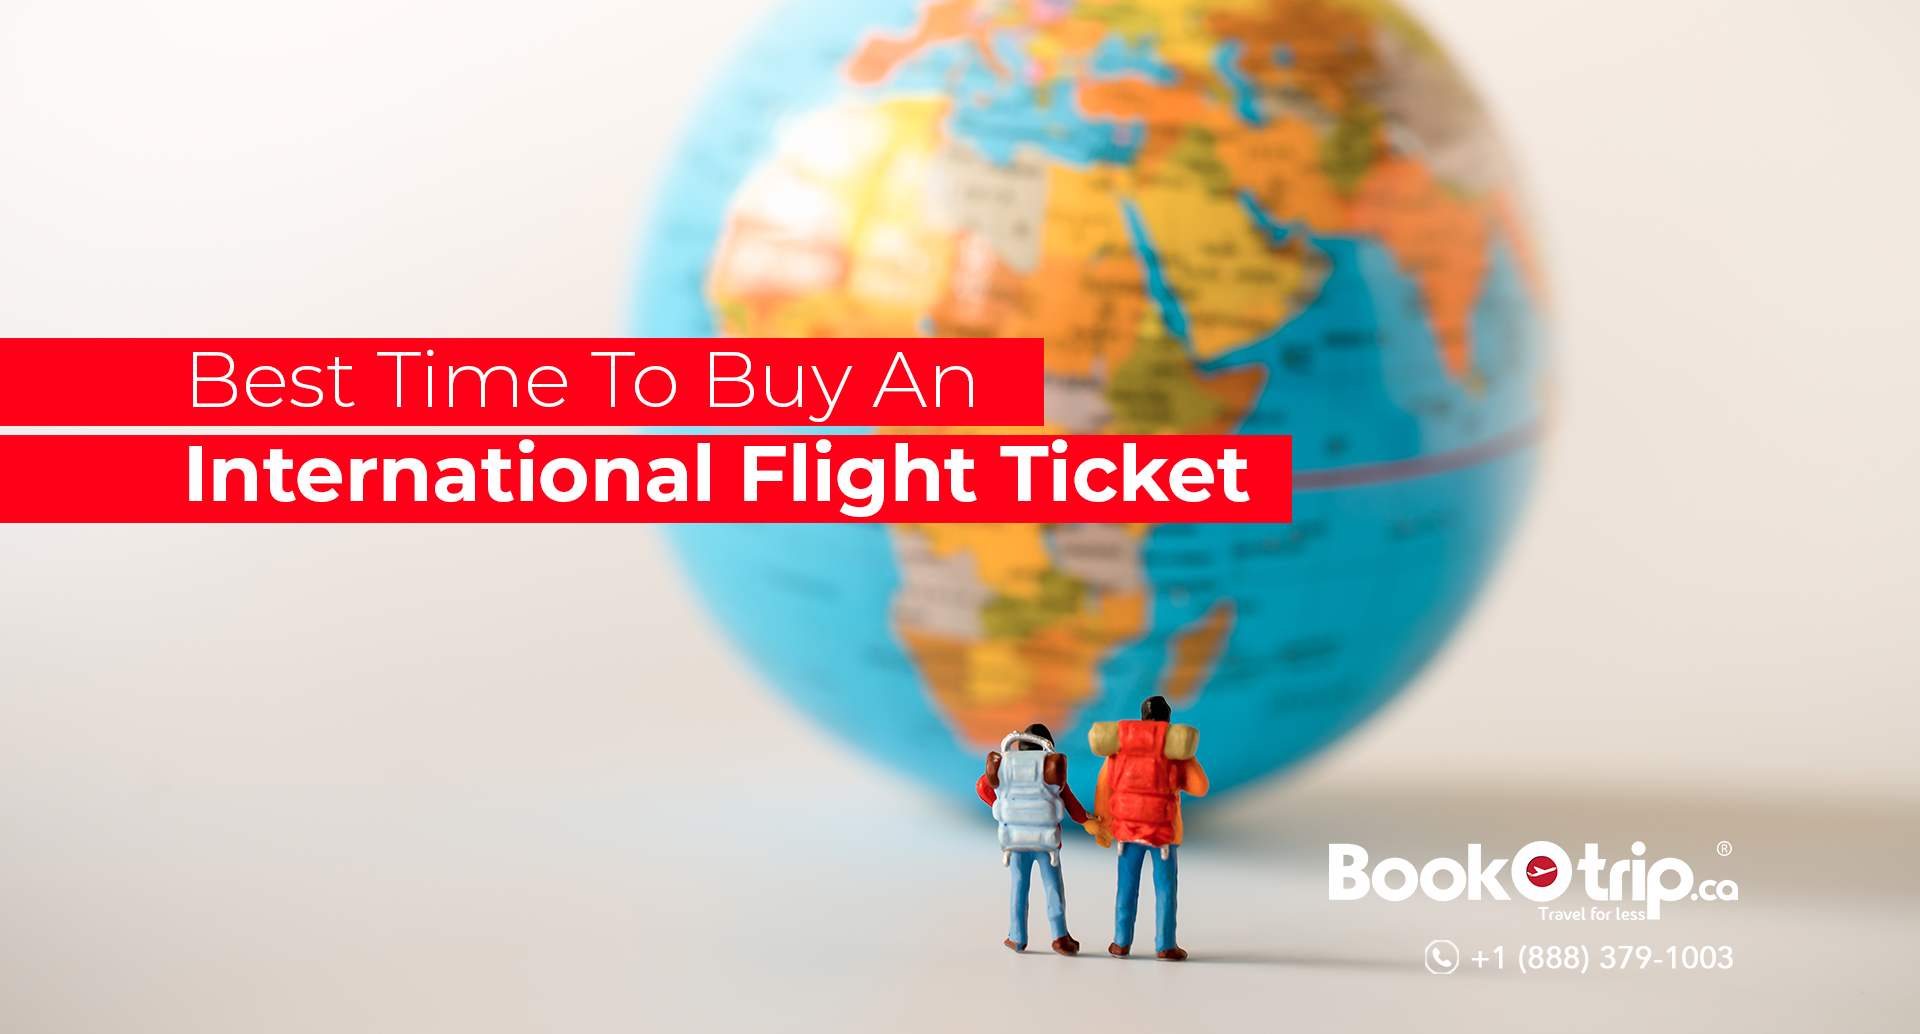 How to get Cheap International Flight Ticket - Distant Dreams